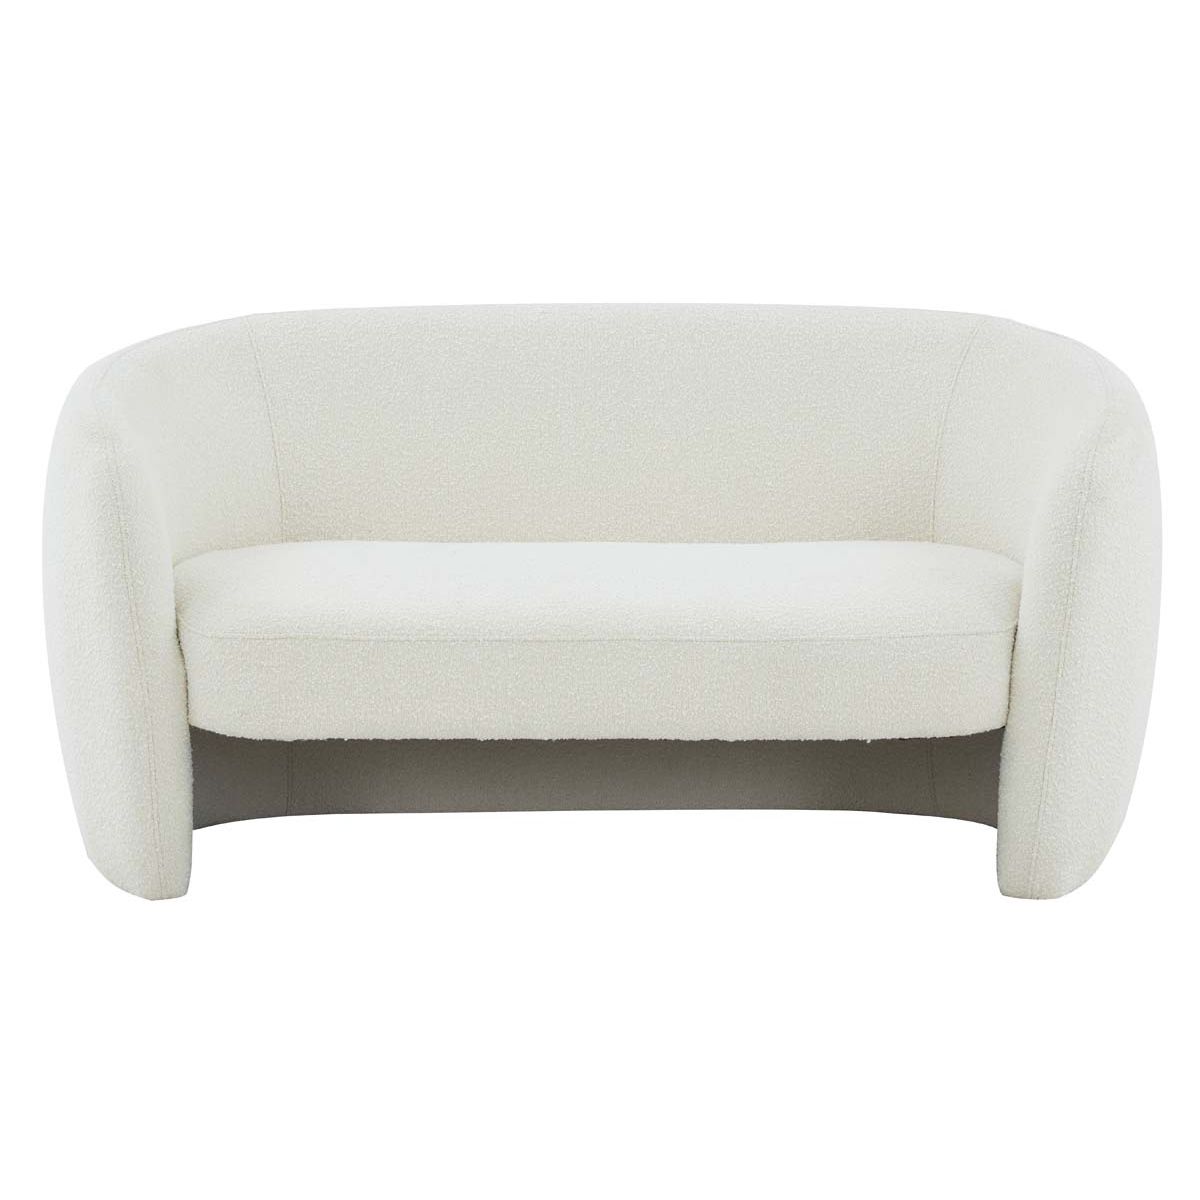 Safavieh Couture Zhao Curved Loveseat - Ivory